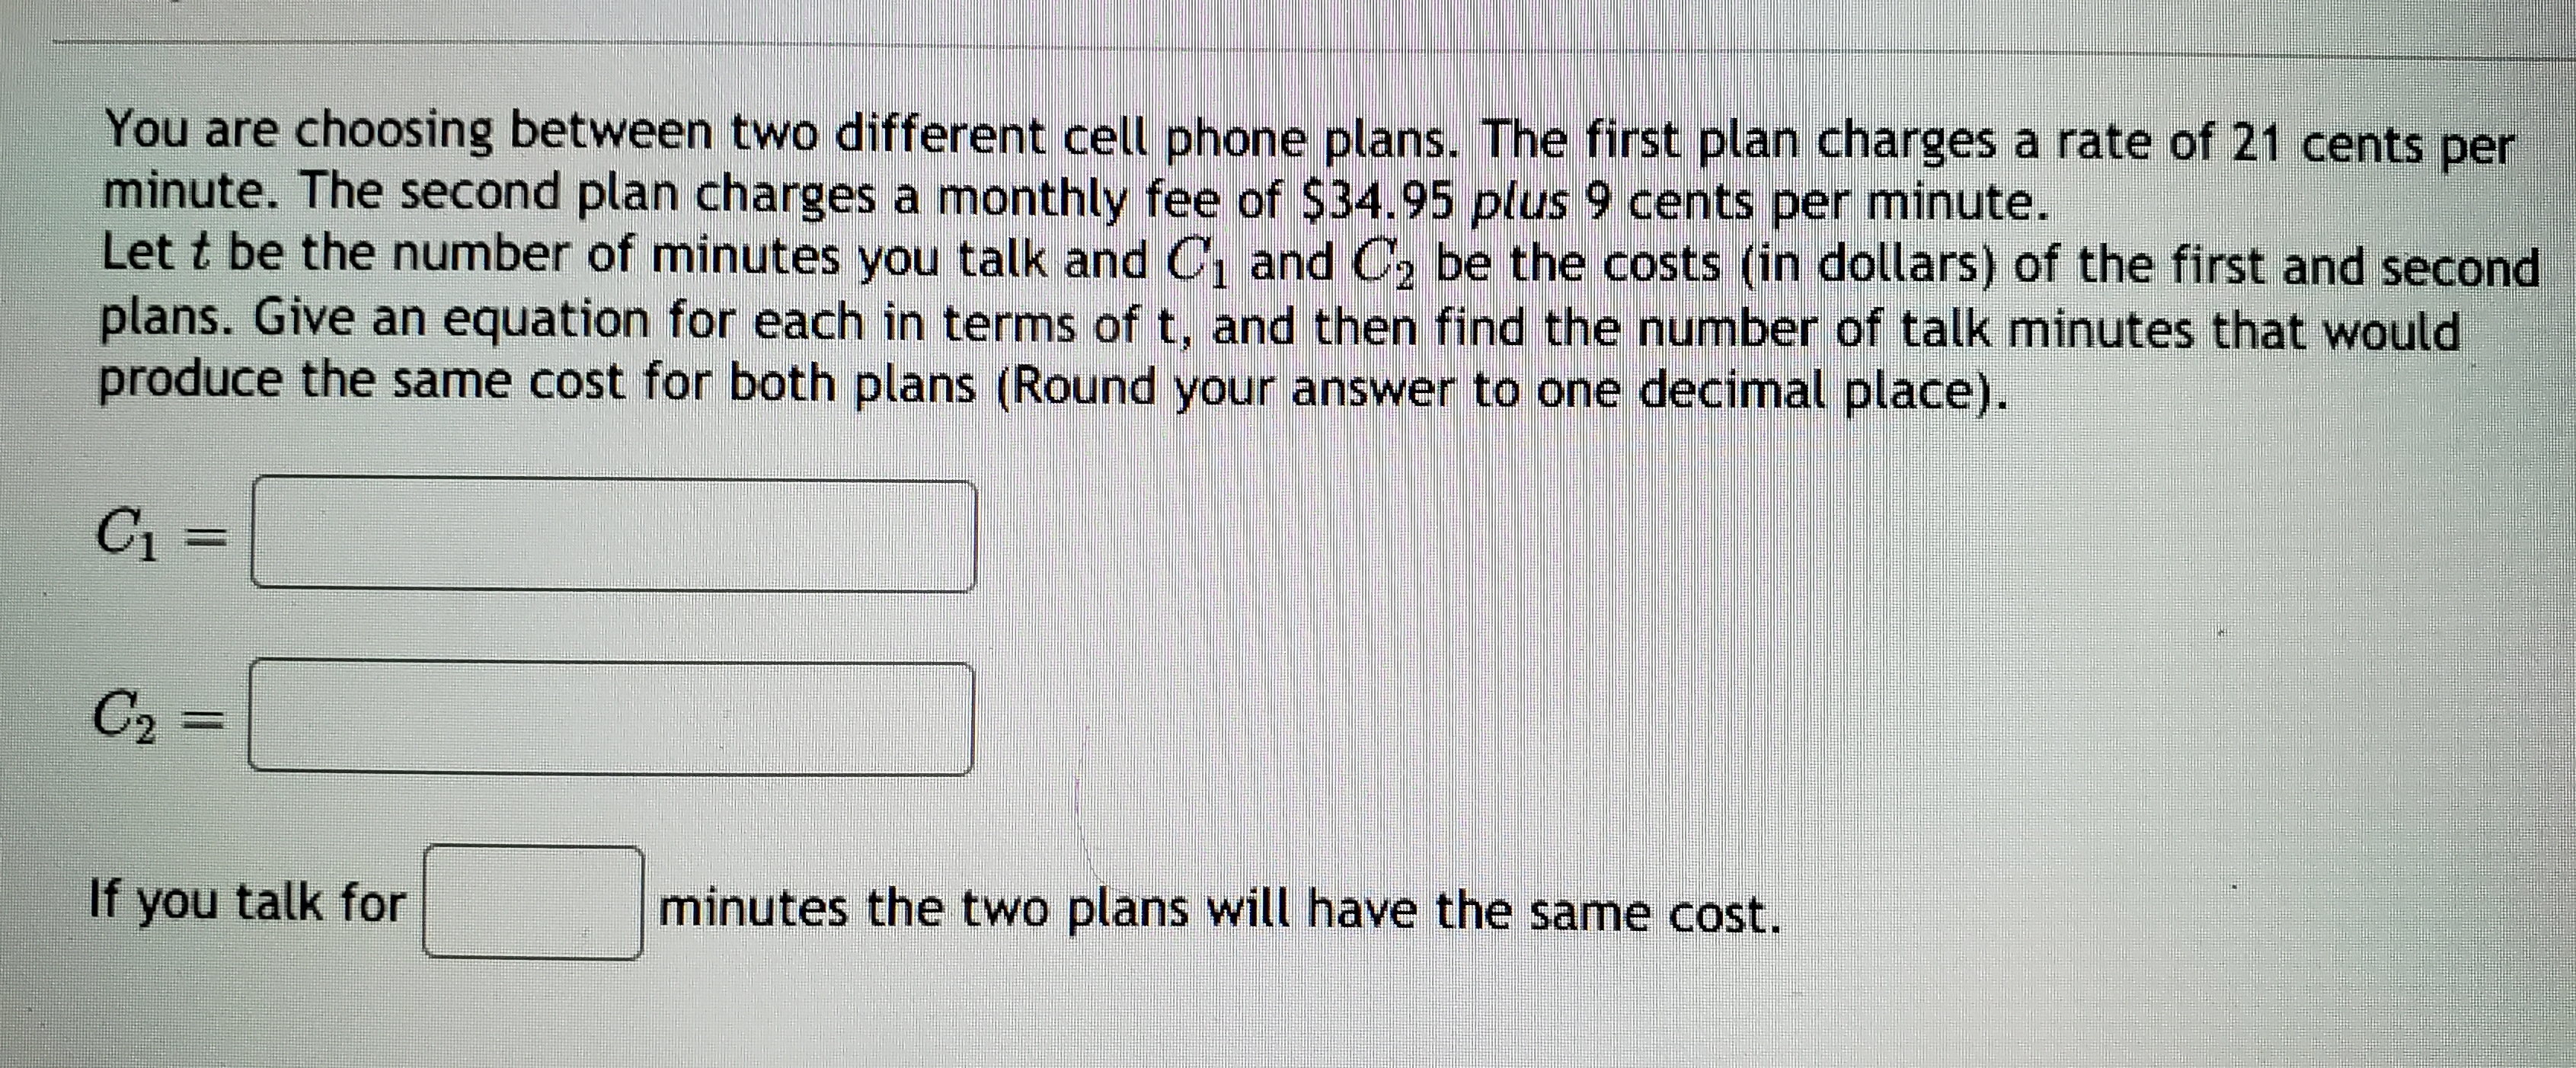 You are choosing between two different cell phone plans. The first plan charges a rate of 21 cents per
minute. The second plan charges a monthly fee of $34.95 plus 9 cents per minute.
Let t be the number of minutes you talk and C, and C, be the costs (in dollars) of the first and second
plans. Give an equation for each in terms of t, and then find the number of talk minutes that would
produce the same cost for both plans (Round your answer to one decimal place).
C1
%3D
C2 =
If you talk for
minutes the two plans will have the same cost.
